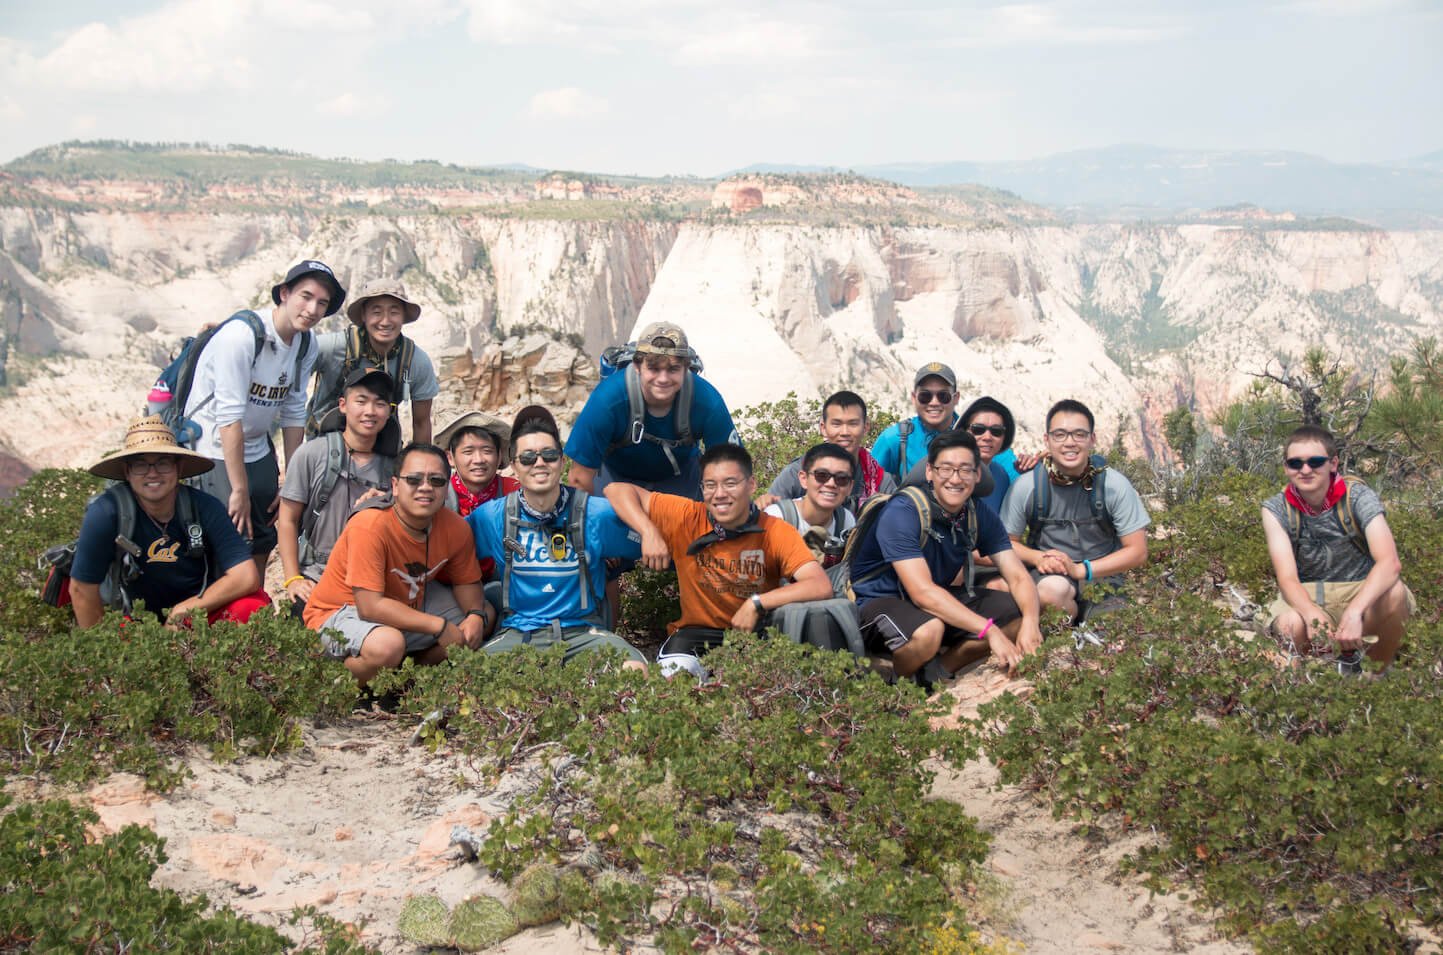 Daniel with his friends and mentees from UC Irvine hiking in Zion National Park